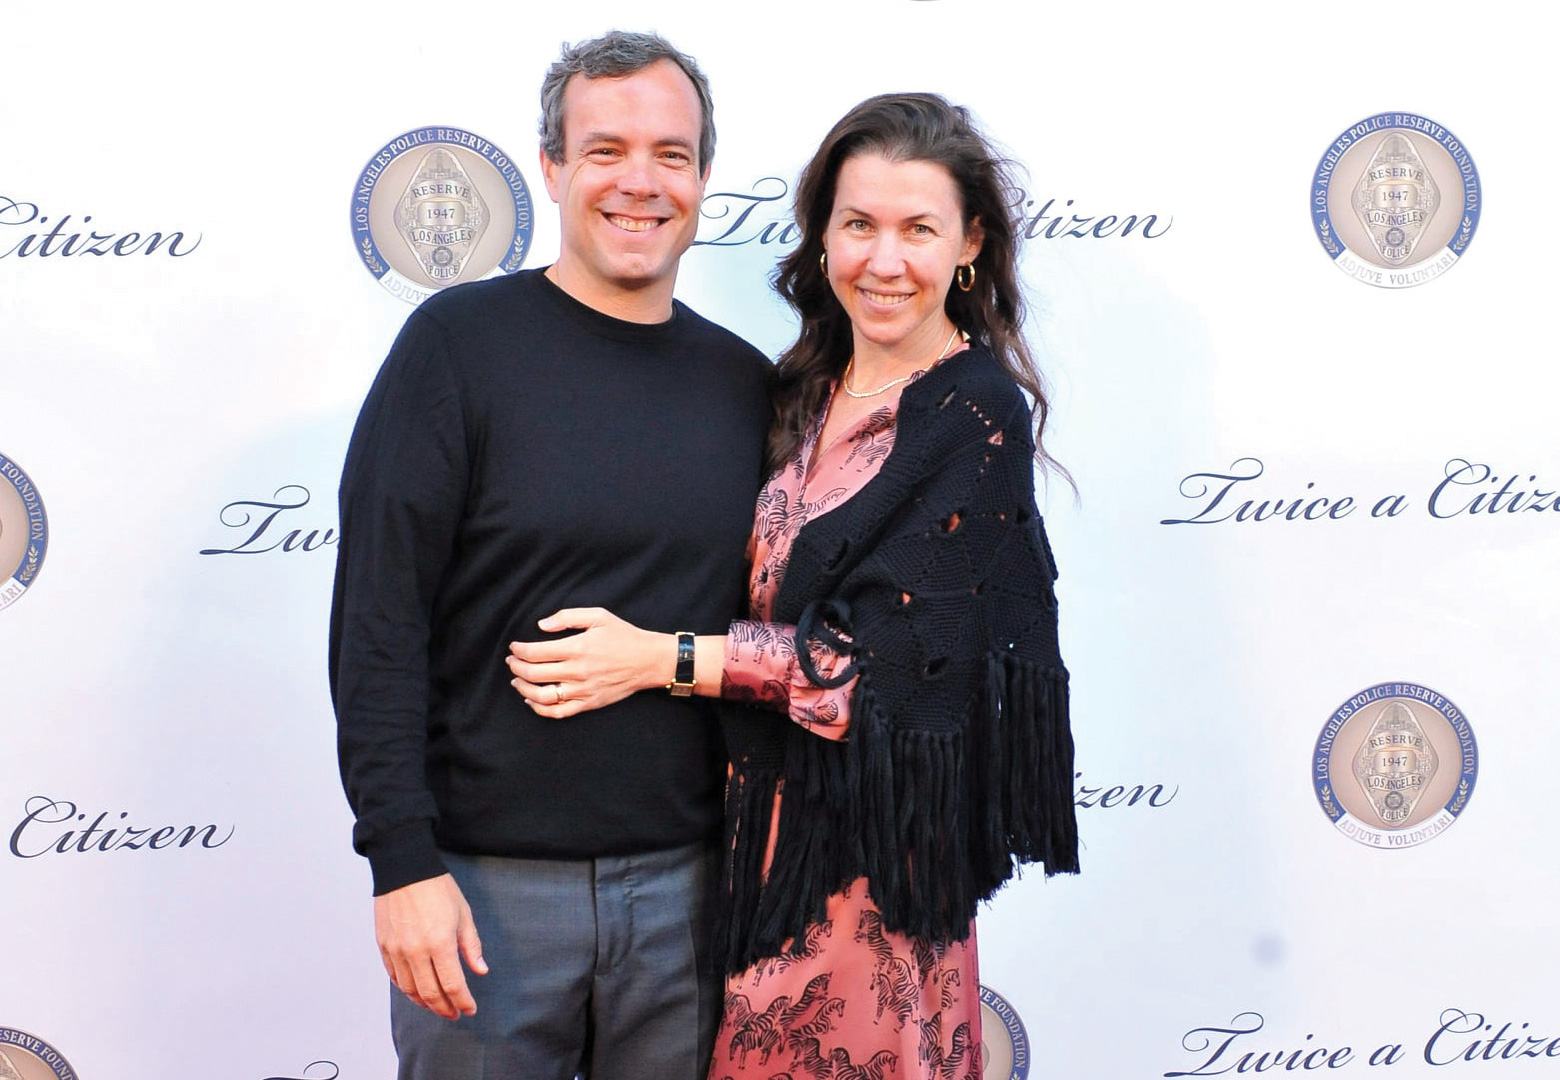 skirball-reopens-reserve-officer-of-the-year-twice-a-citizen-gala-30